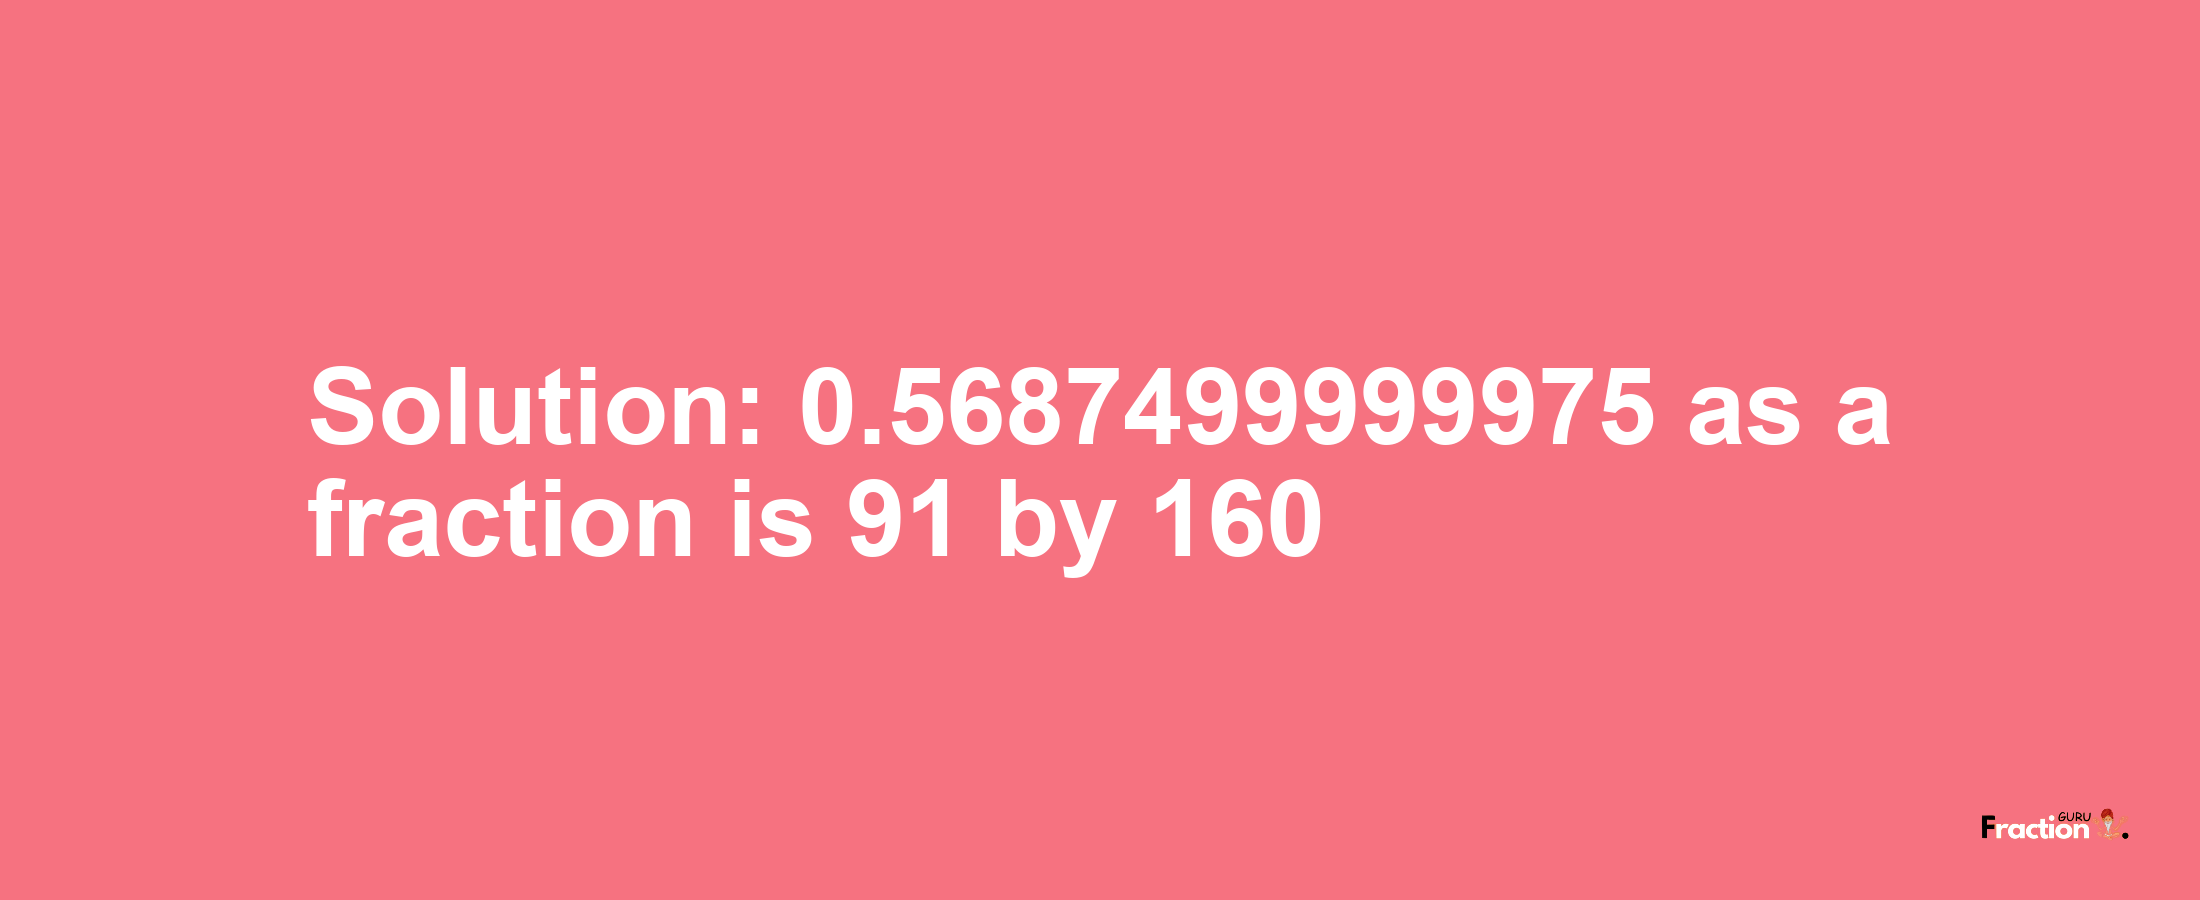 Solution:0.5687499999975 as a fraction is 91/160